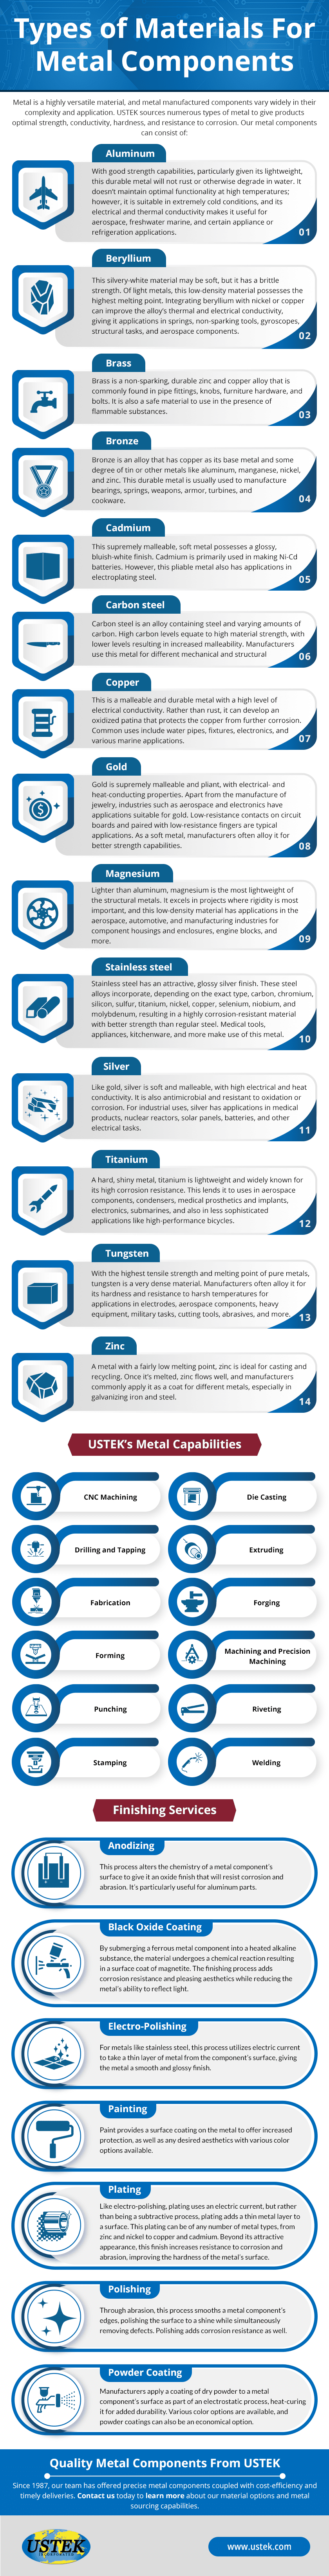 Types of Materials For Metal Components